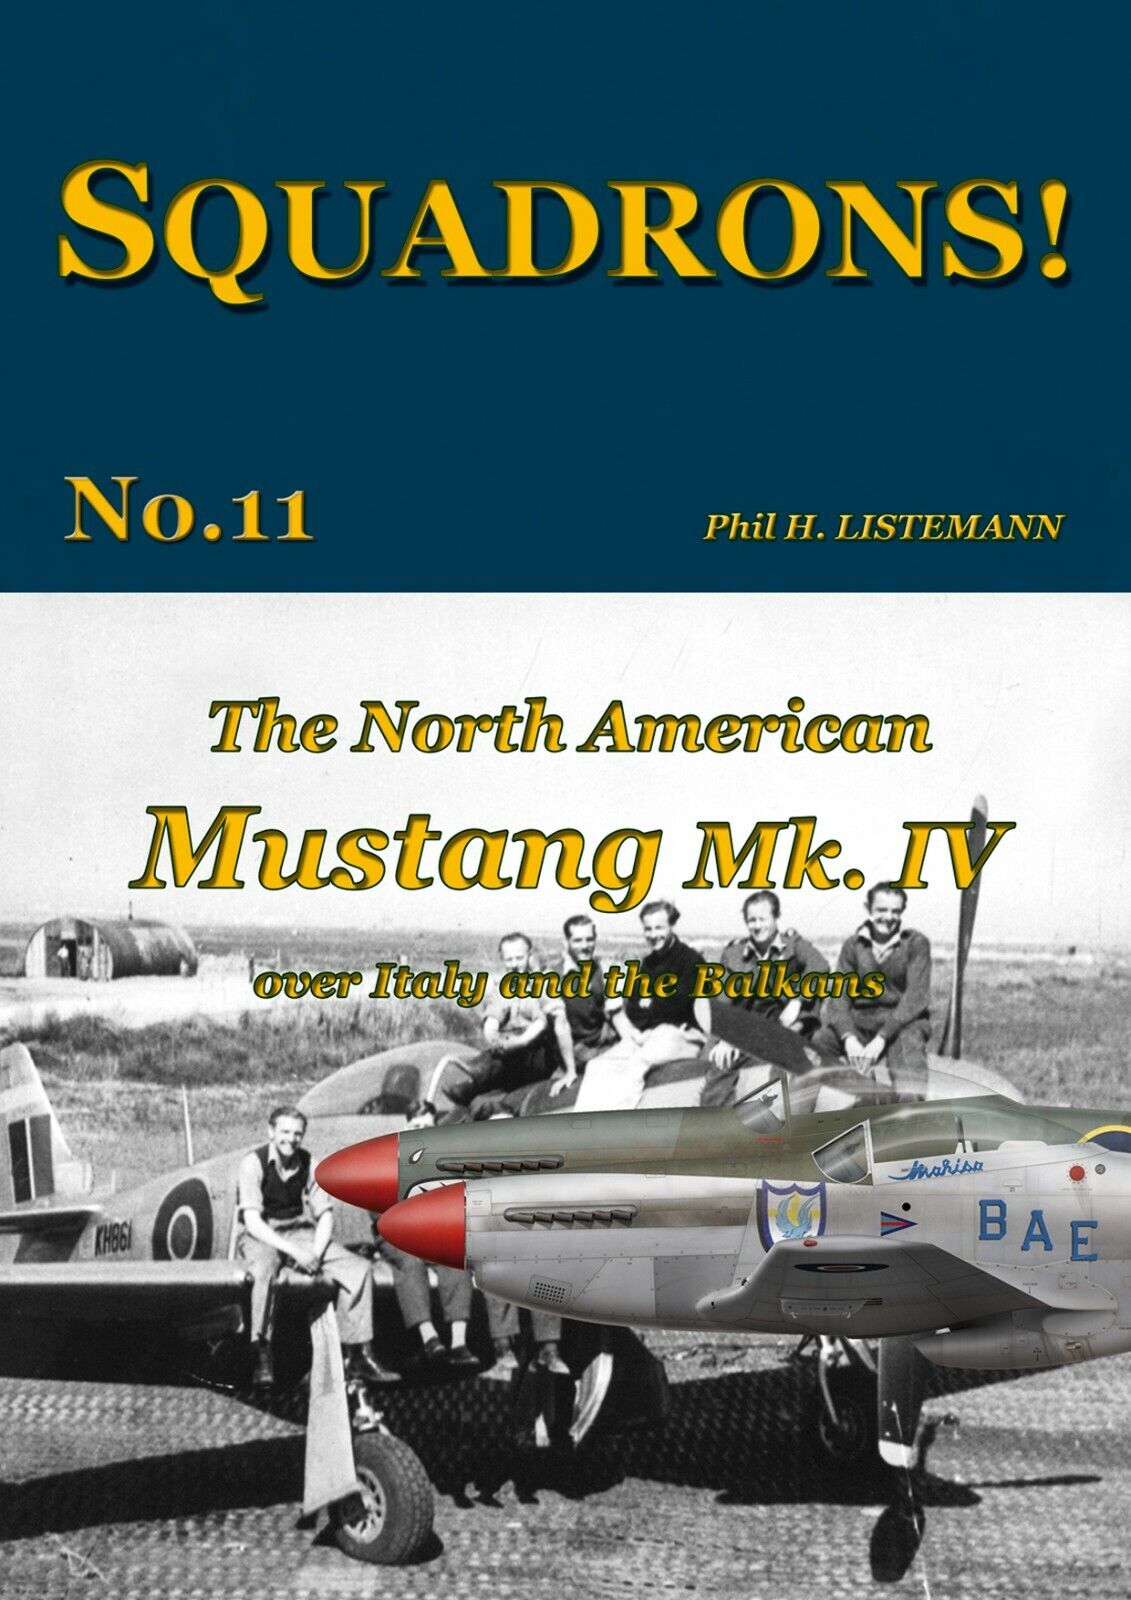 SQUADRONS No. 11 - The MUSTANG MK. IV over Italy and the Balkans (Rev. Mar.22)